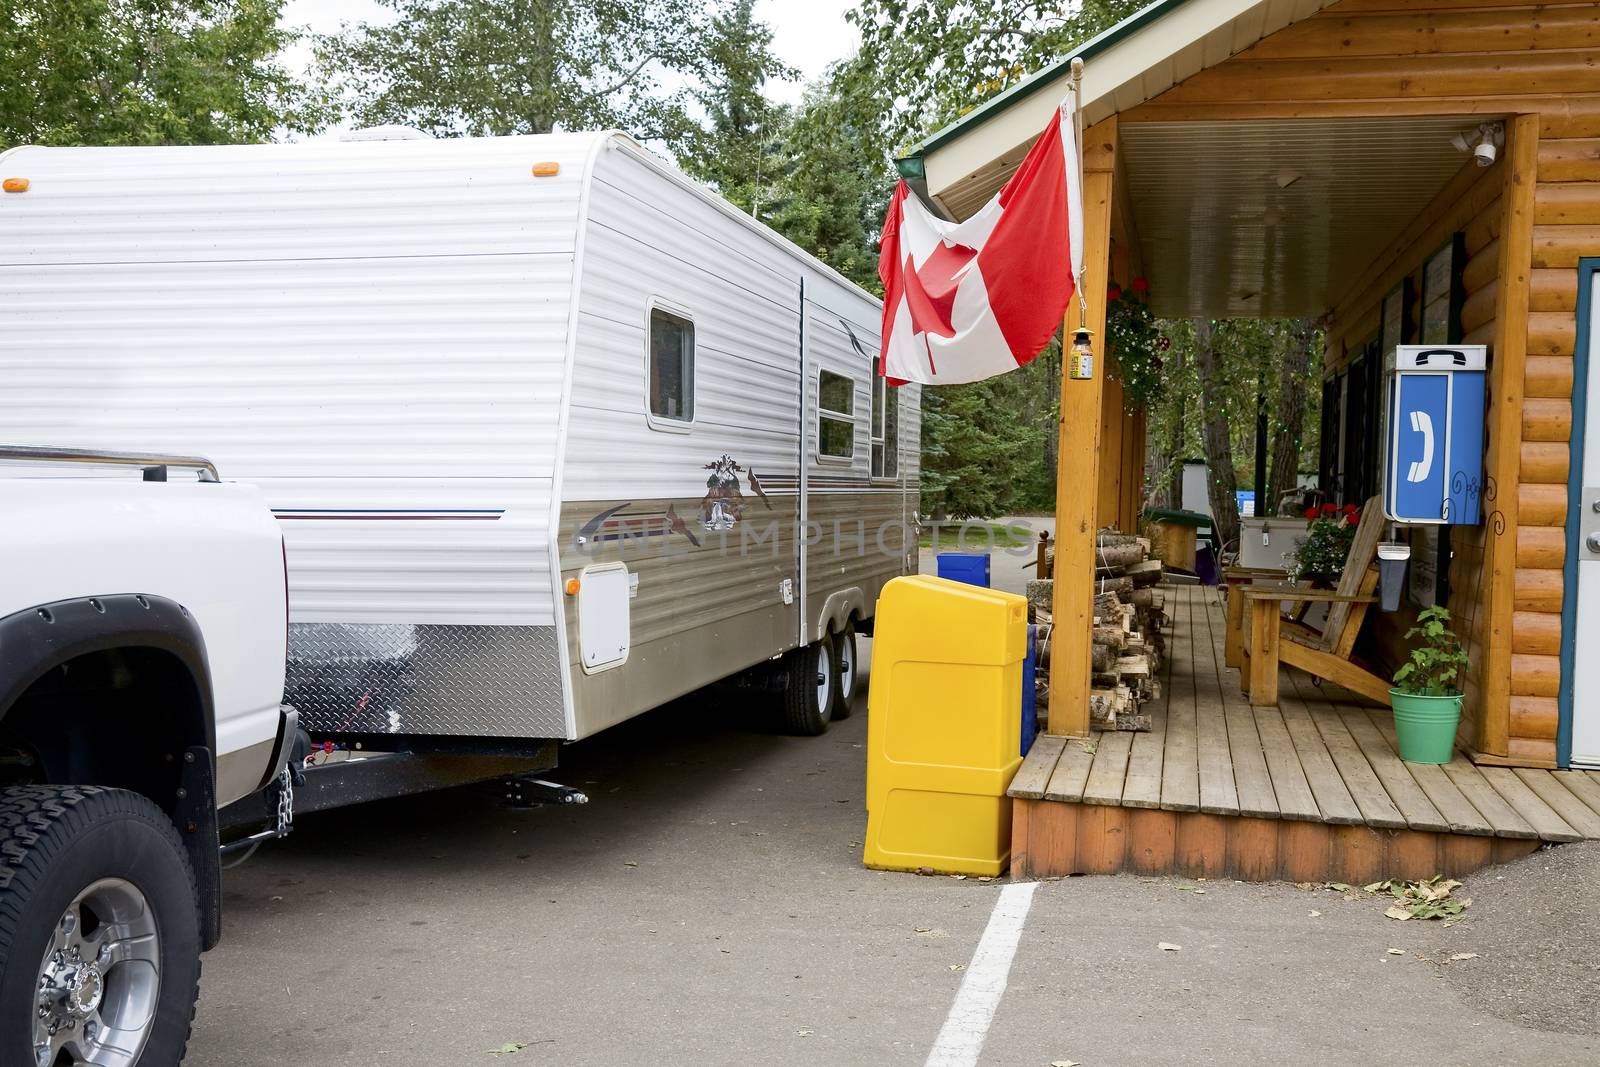 Truck & RV checking into a Canadian campground office.